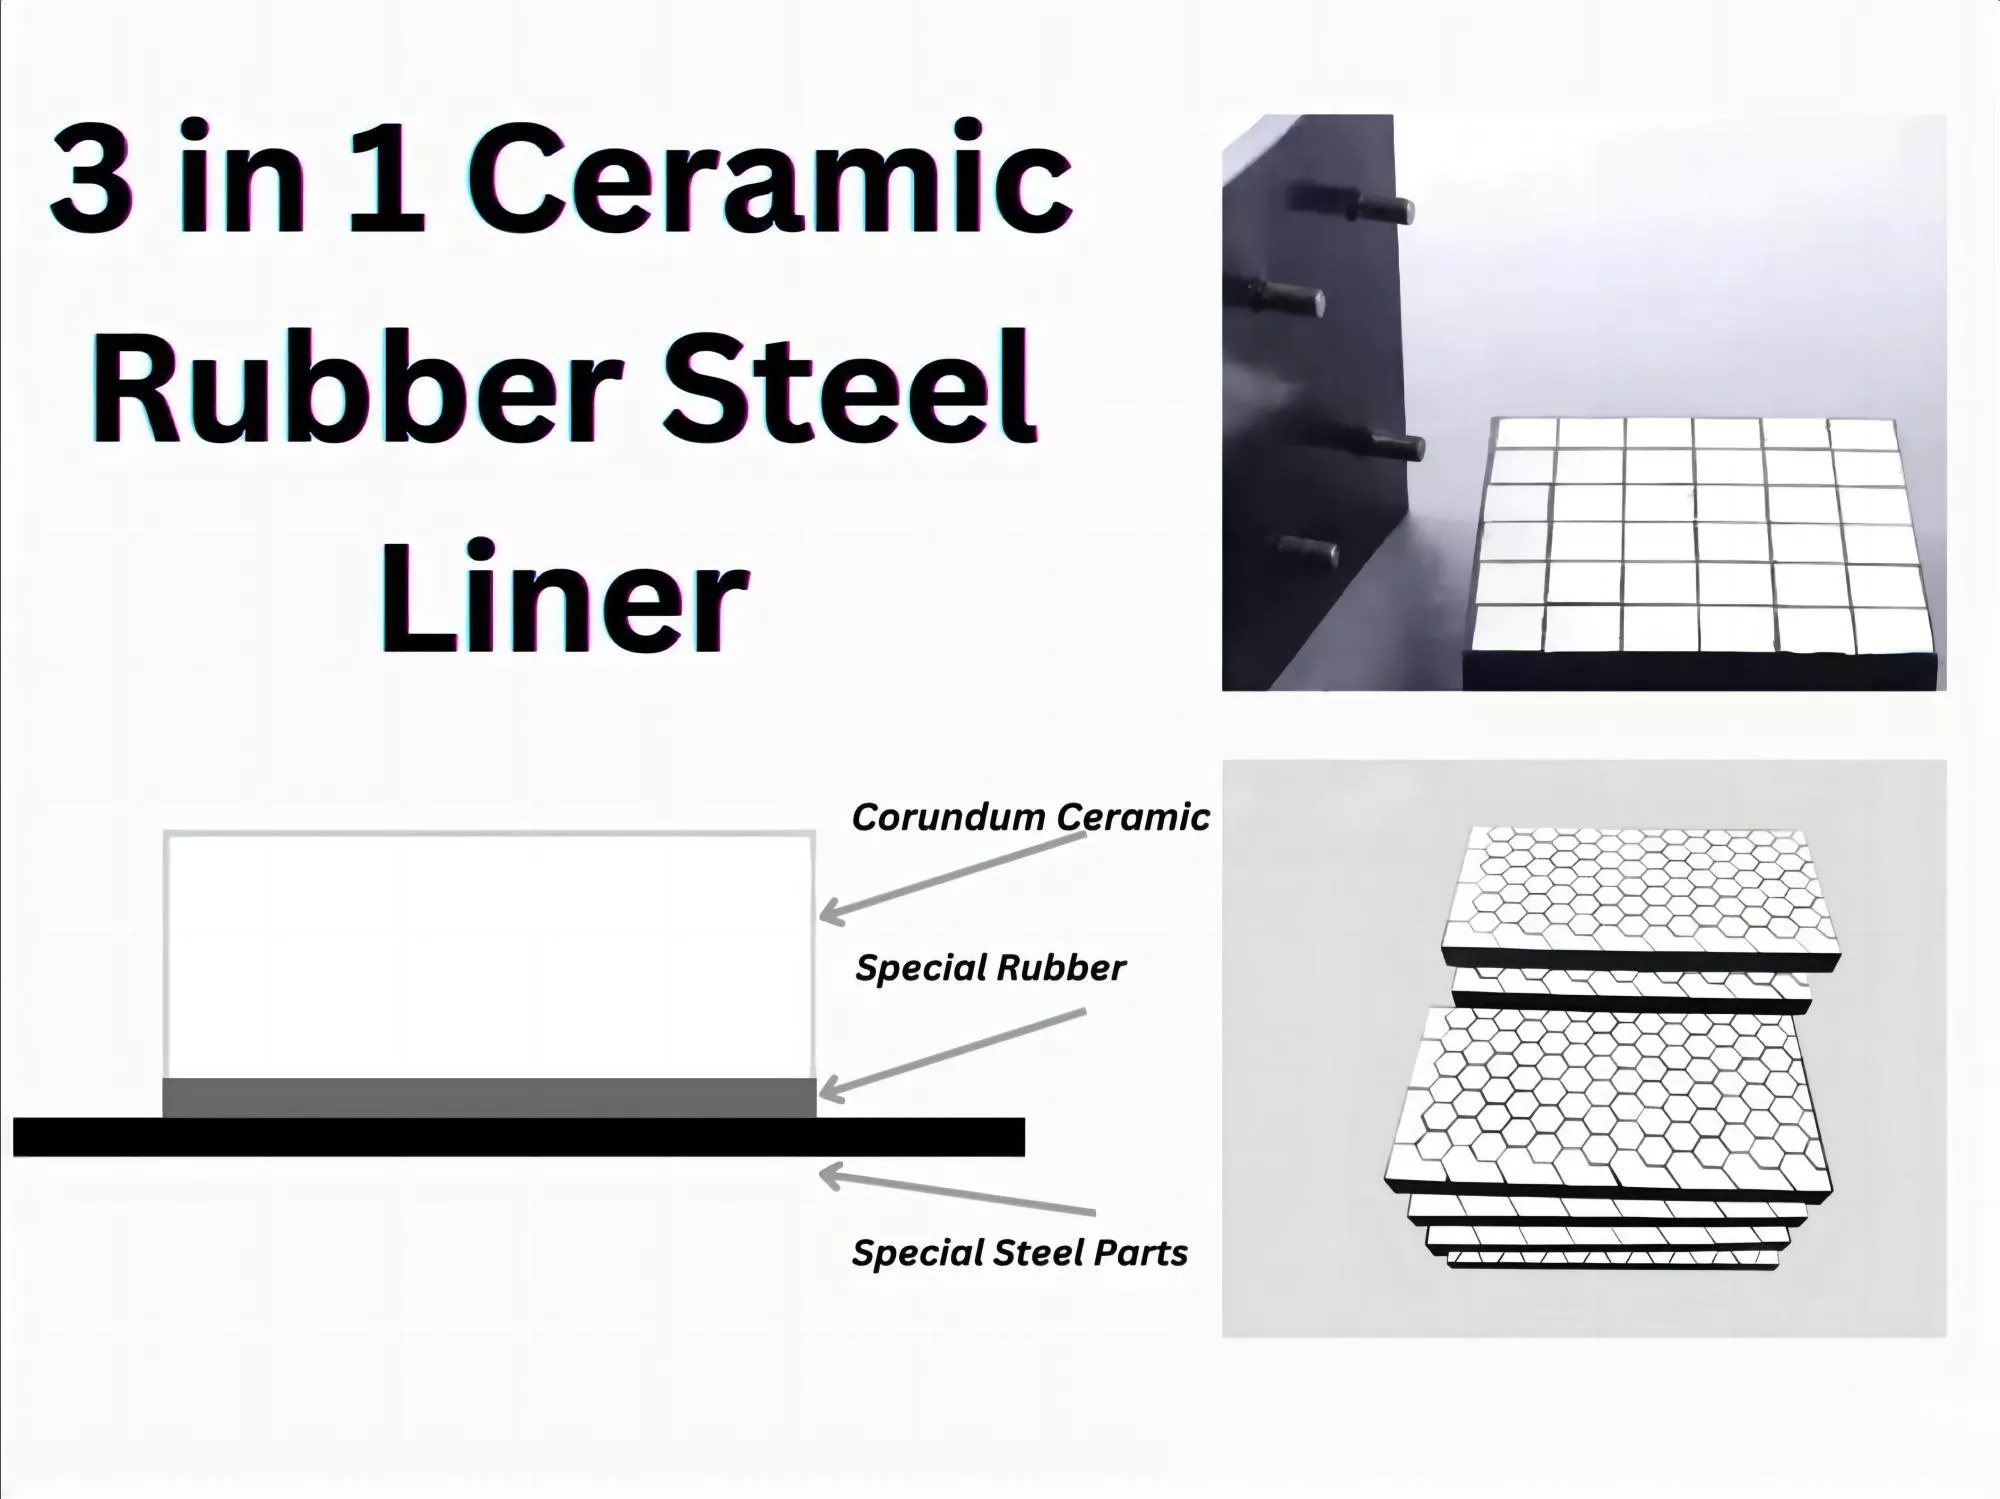 Ceramic Rubber Steel 3 in 1 Liners